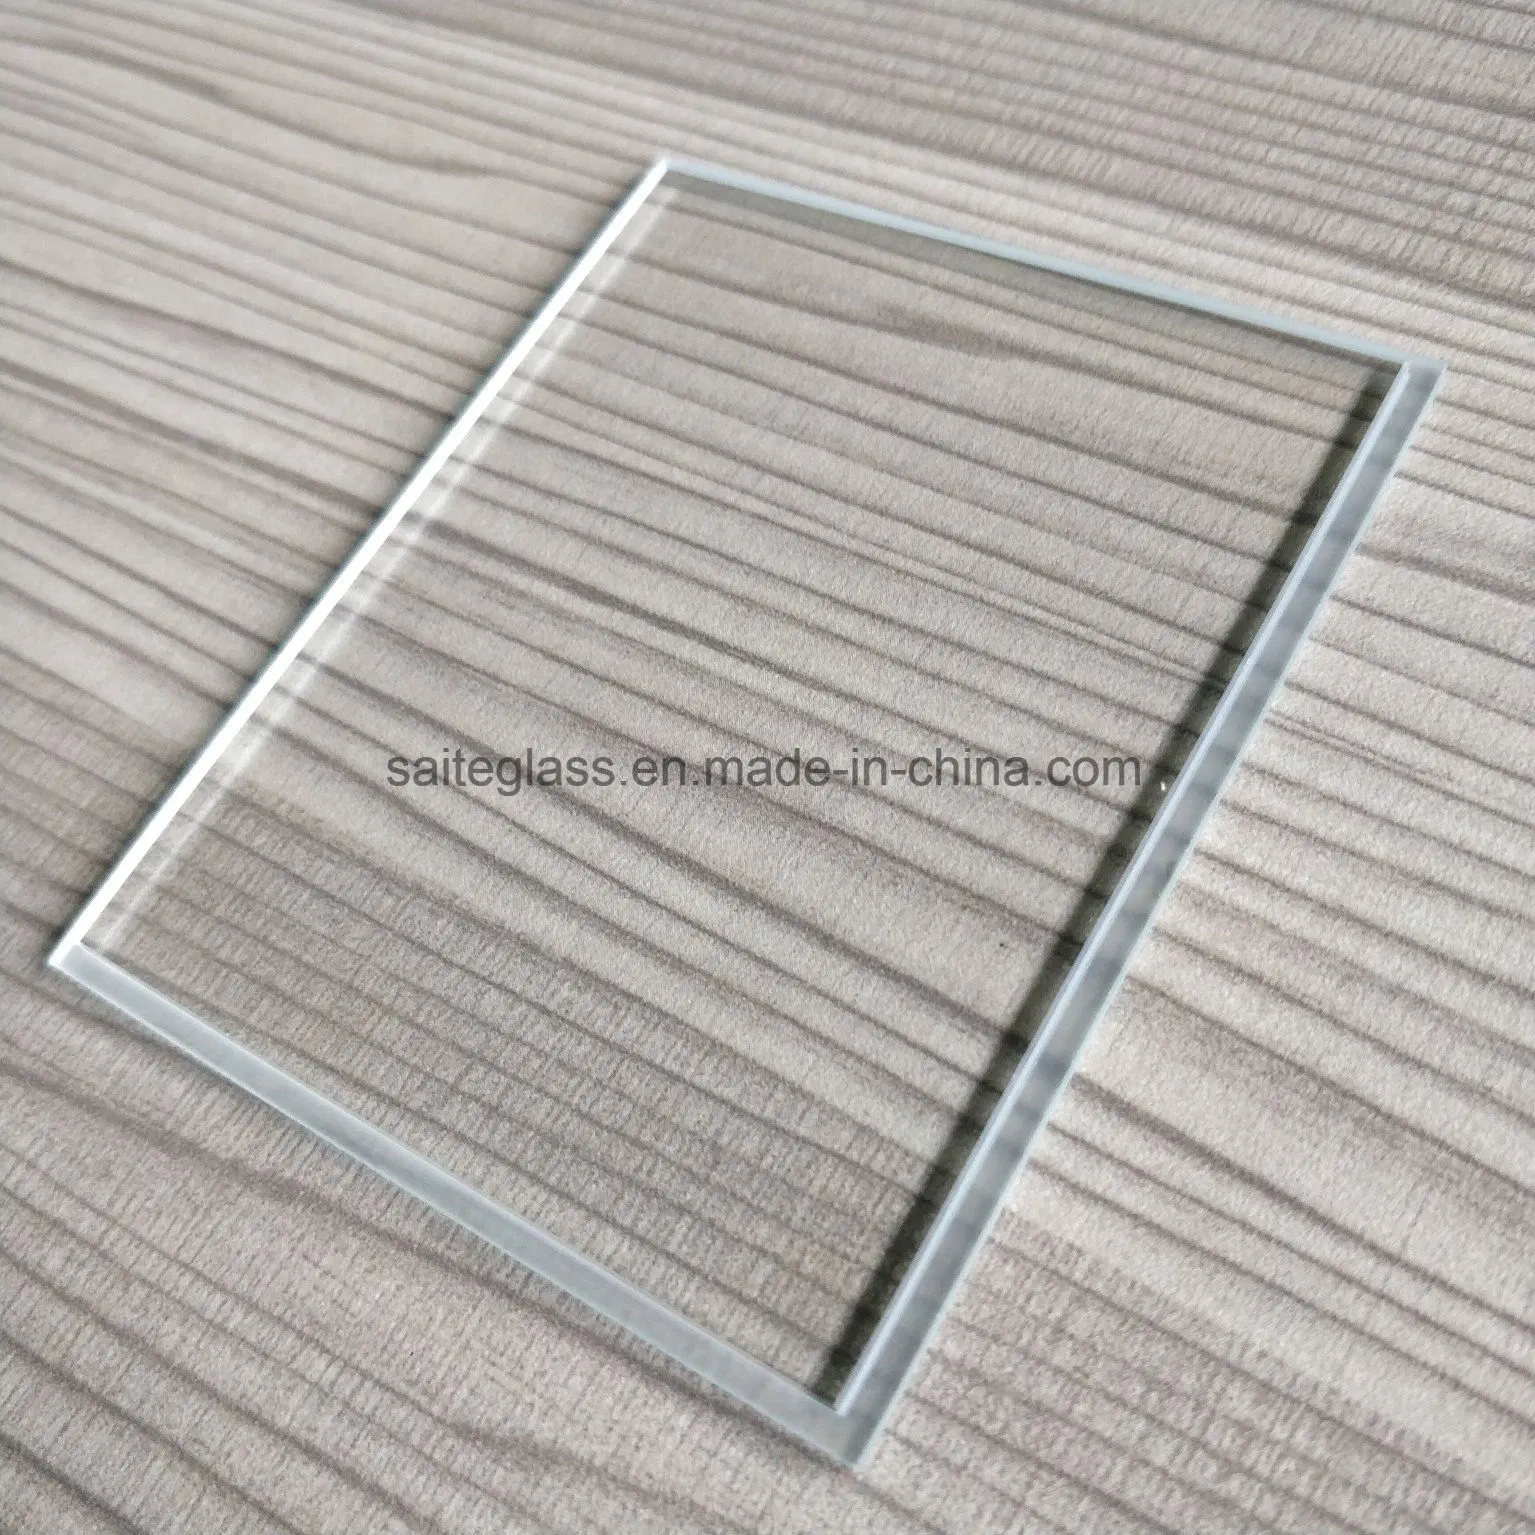 OEM Decorative Tempered Step Glass for LCD LED Lighting Lamp Shade